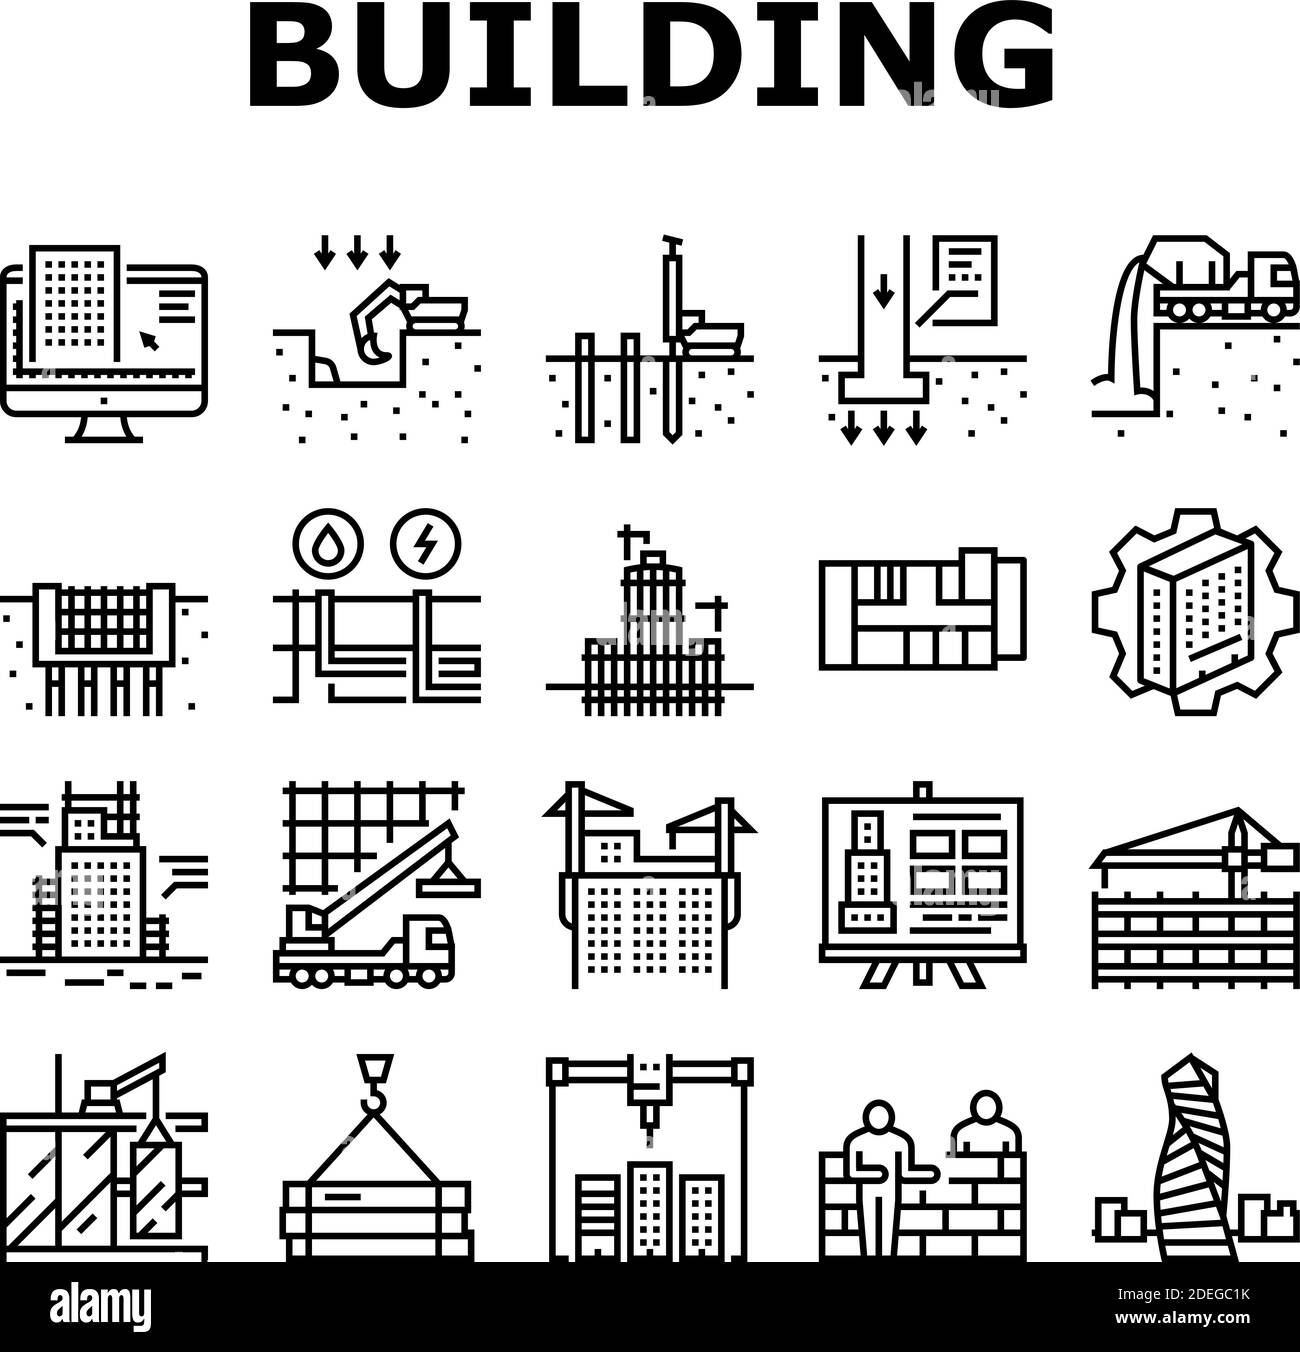 Building Construction Collection Icons Set Vector Stock Vector